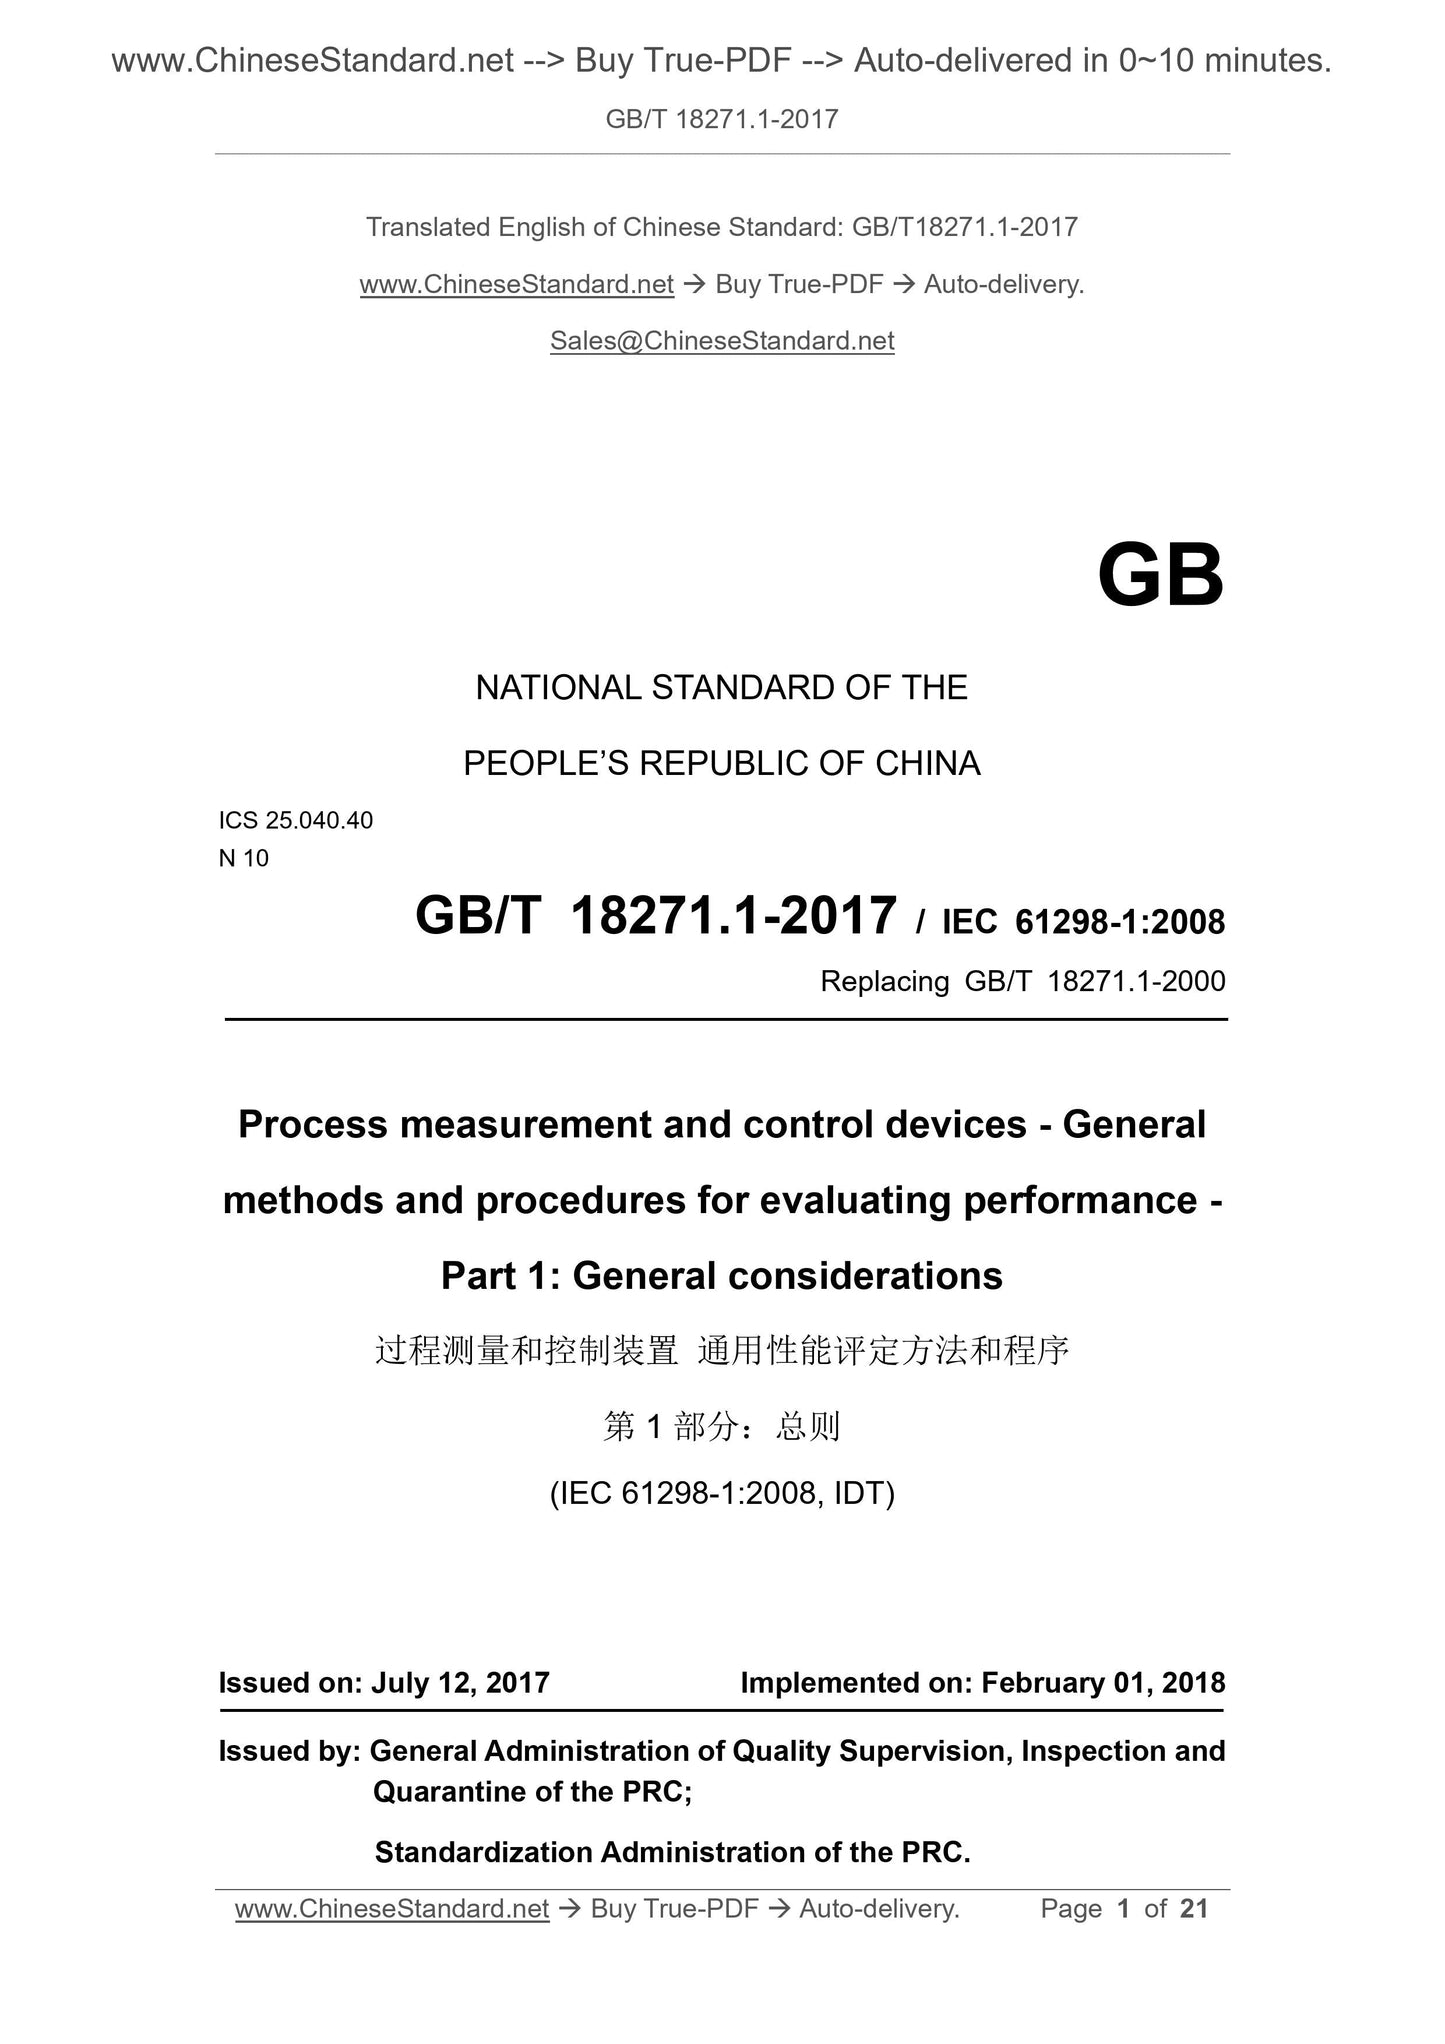 GB/T 18271.1-2017 Page 1